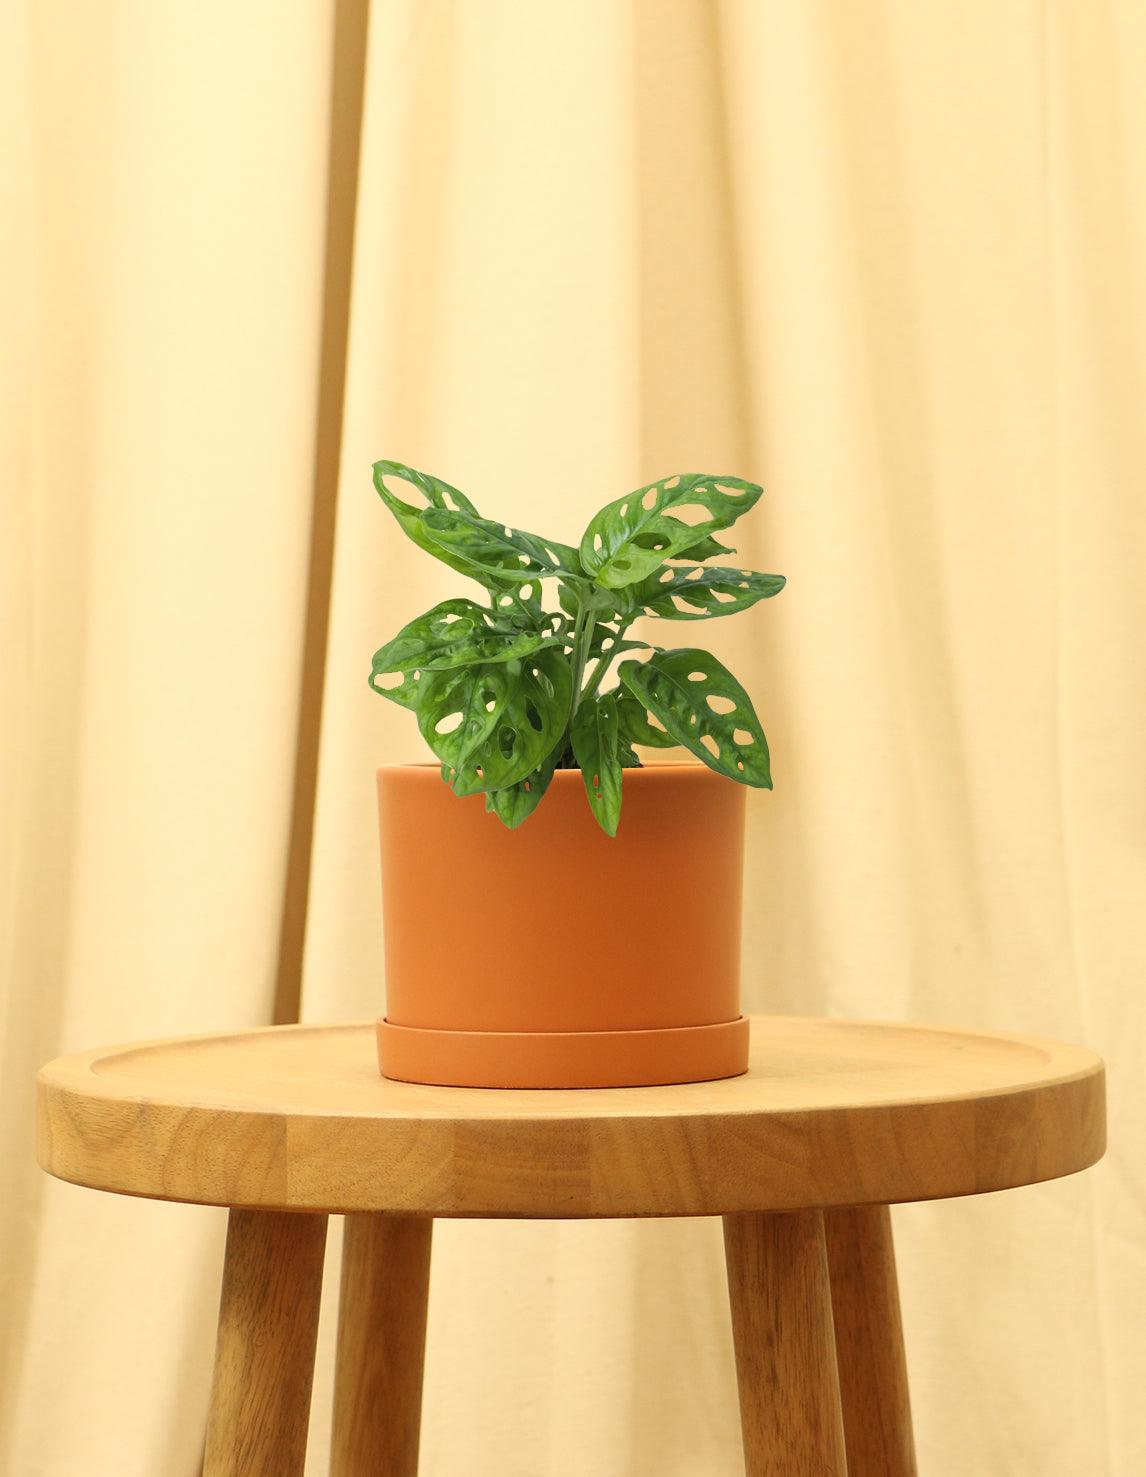 Small Swiss Cheese Plant in orange pot.